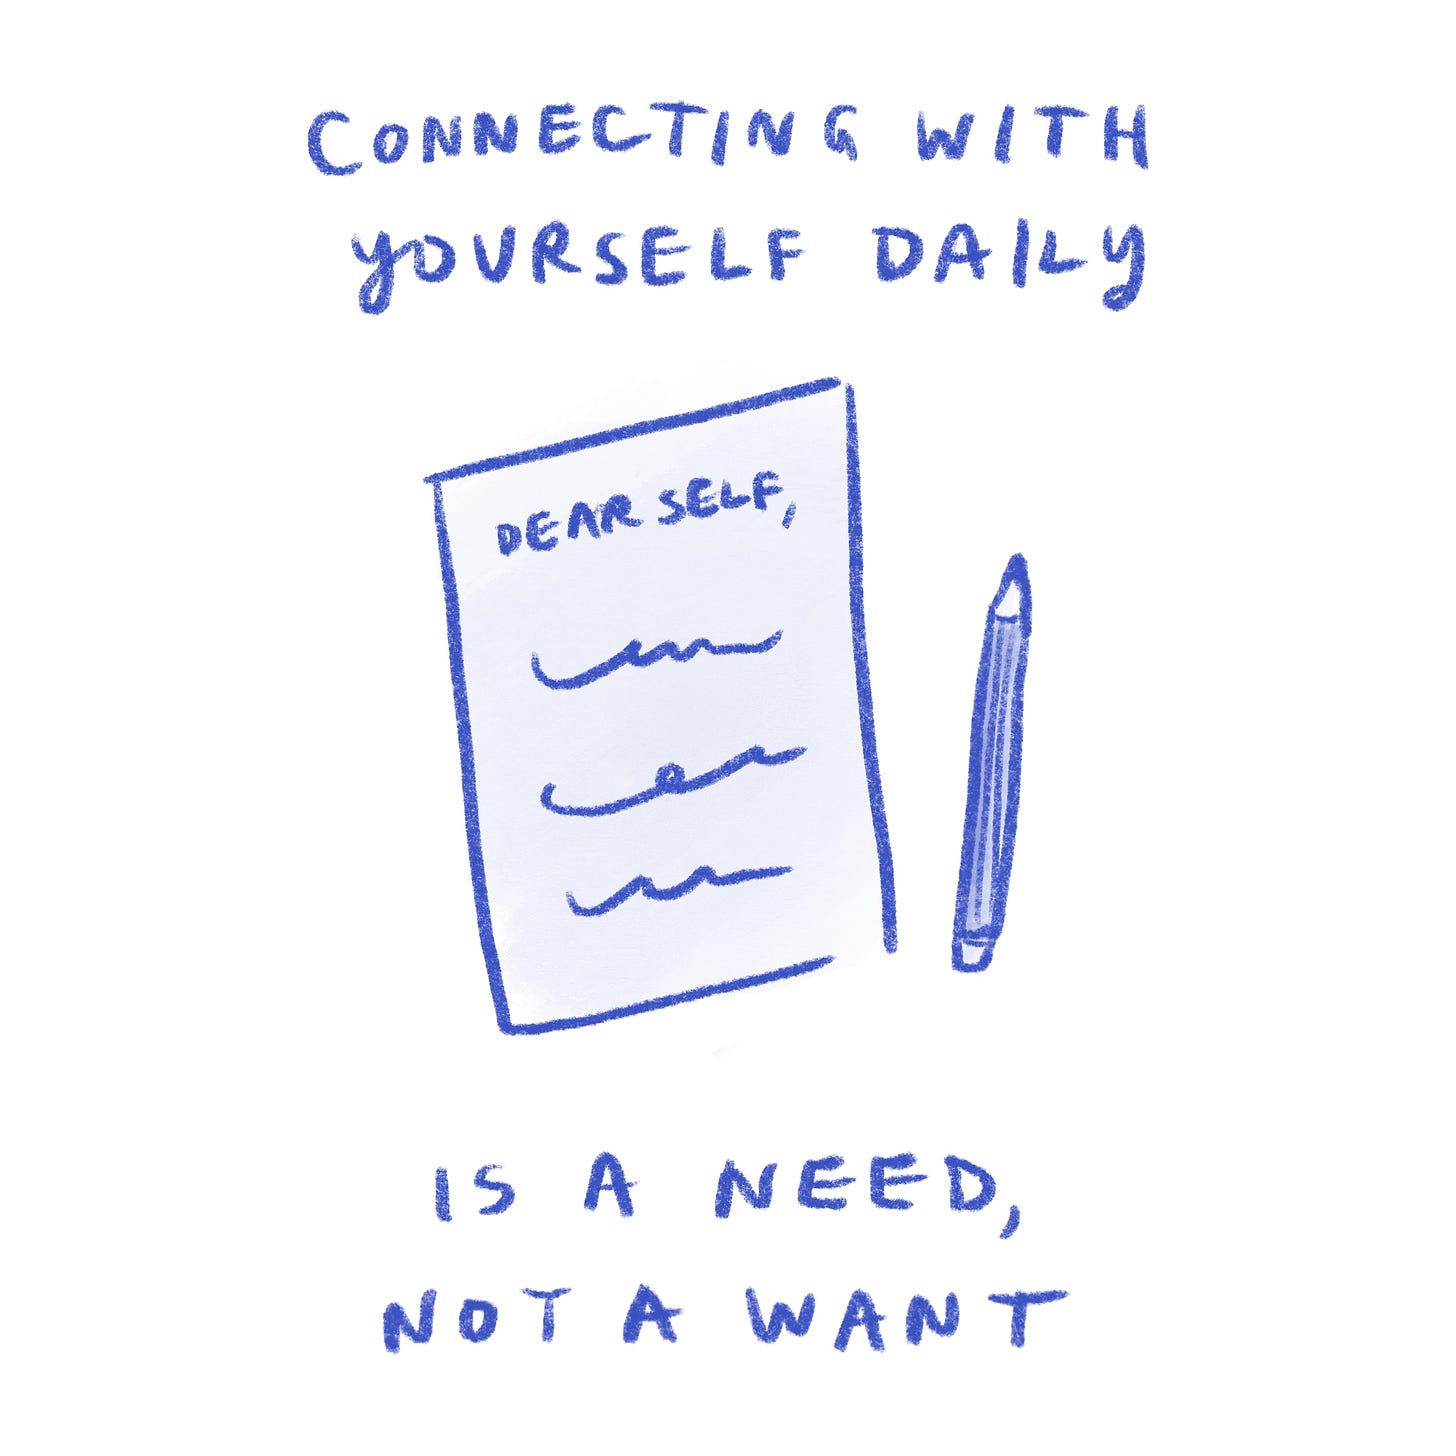 Connecting with yourself daily is a need, not a want